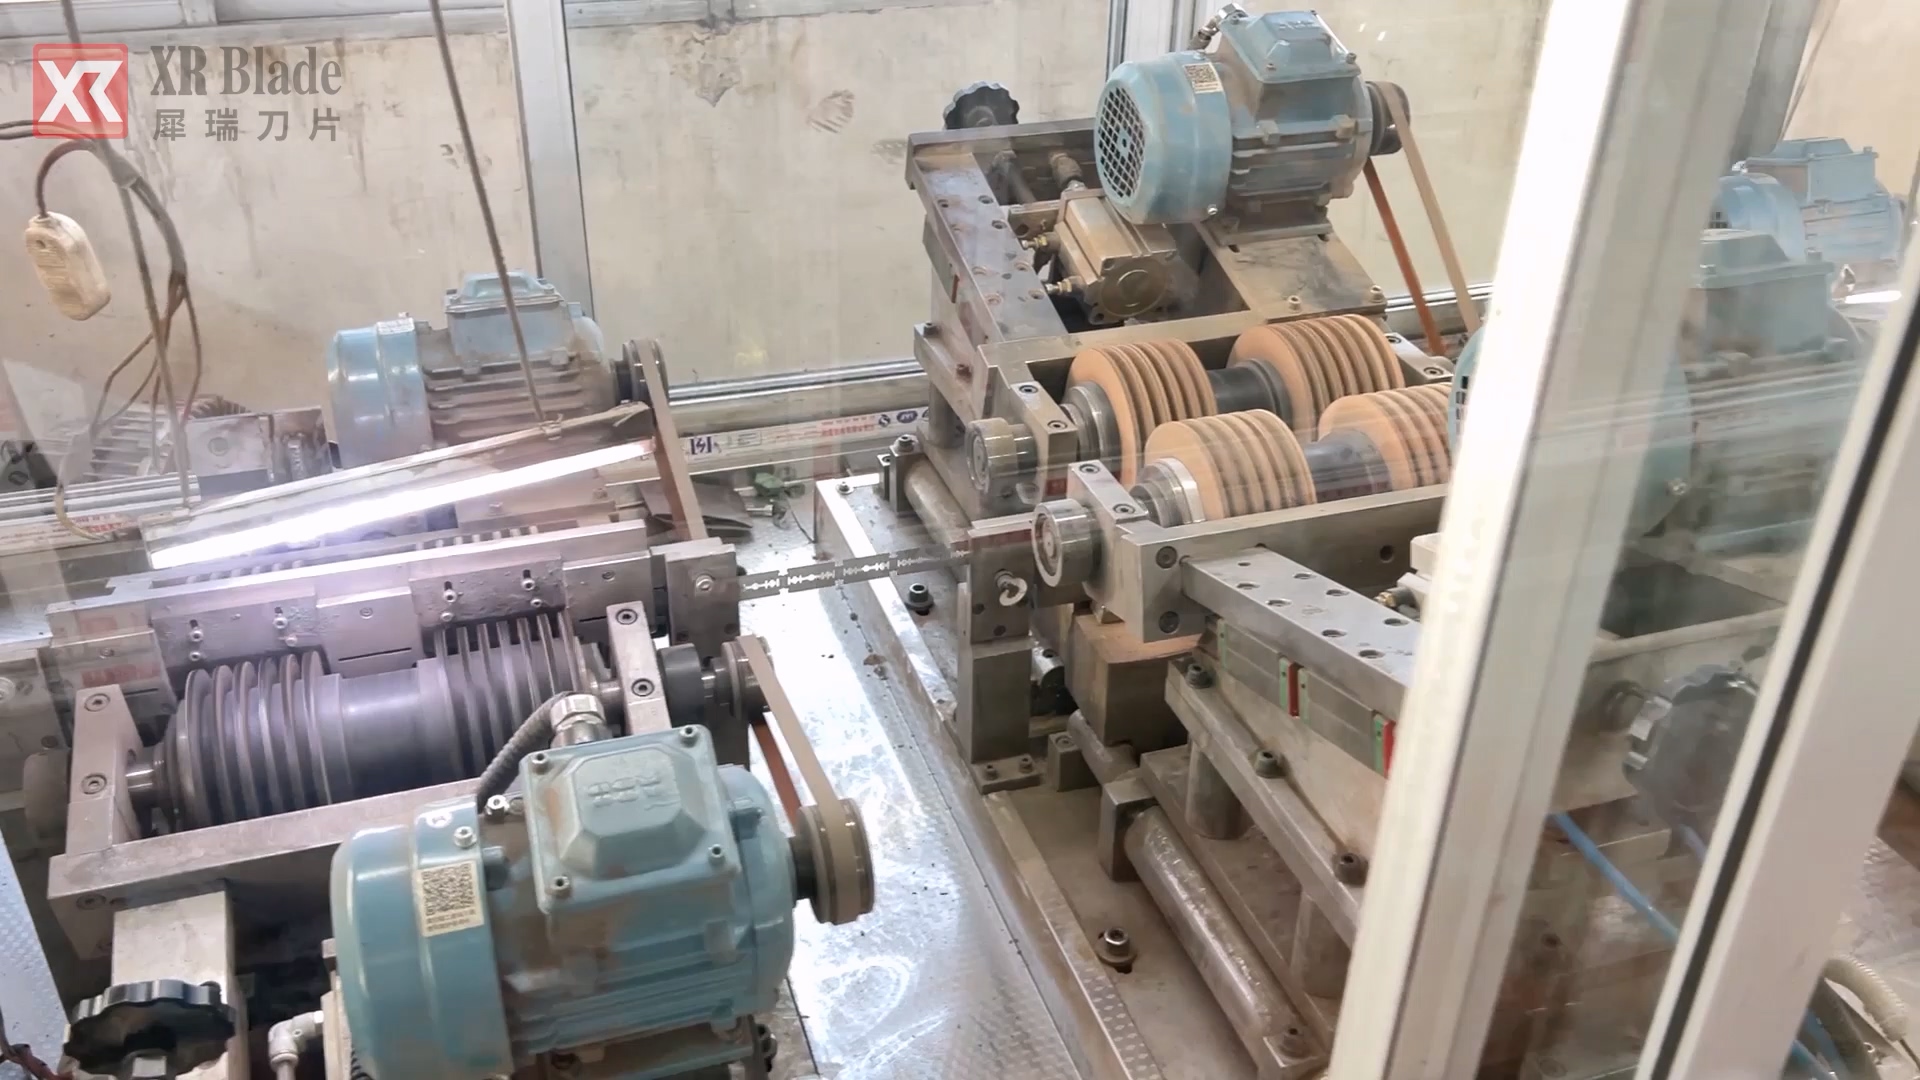 the grinding process of manufacturing double edge blade